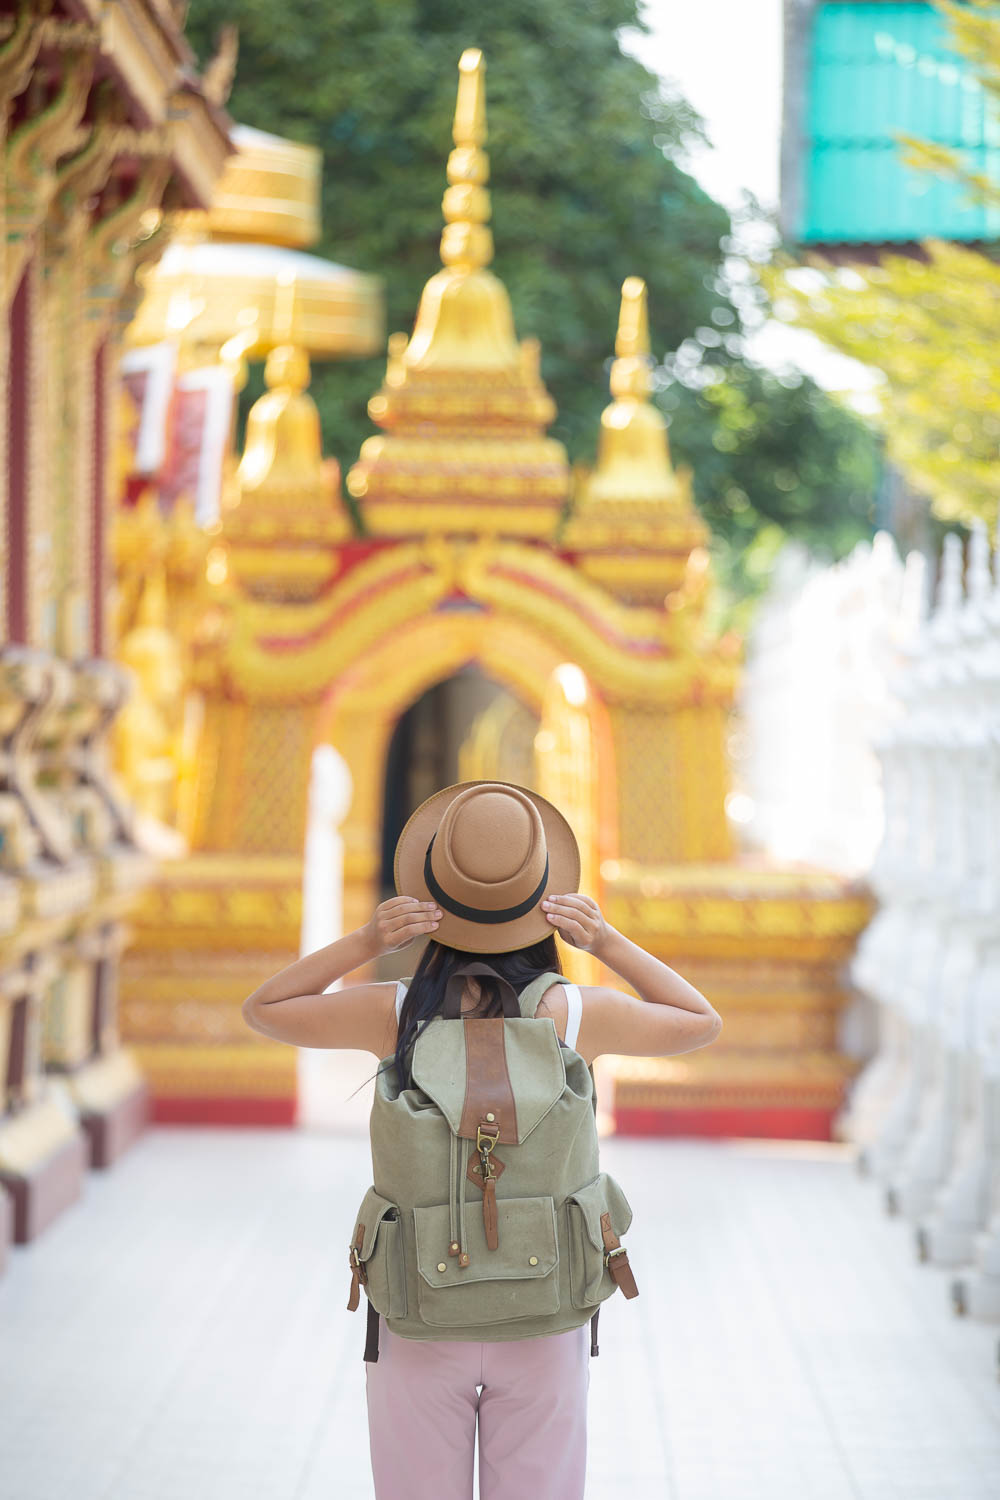 Bangkok is one of those cities that never gets old. There's always something new and exciting to see, do, and eat.